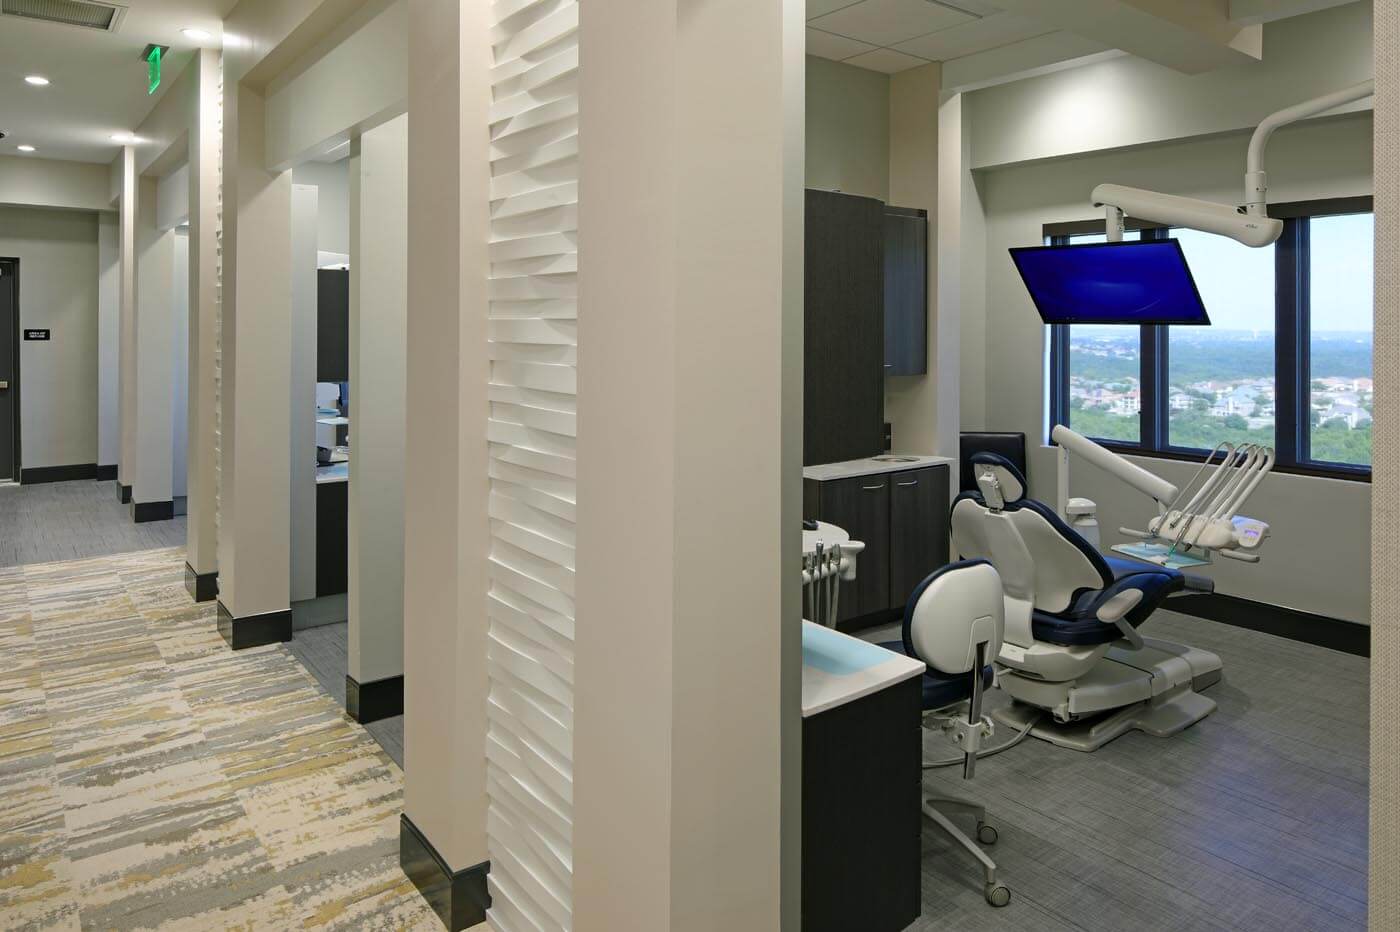 A view of the office hallway, with soft but ample ambient lighting, and part of a sleek, modern exam room visible on the right.